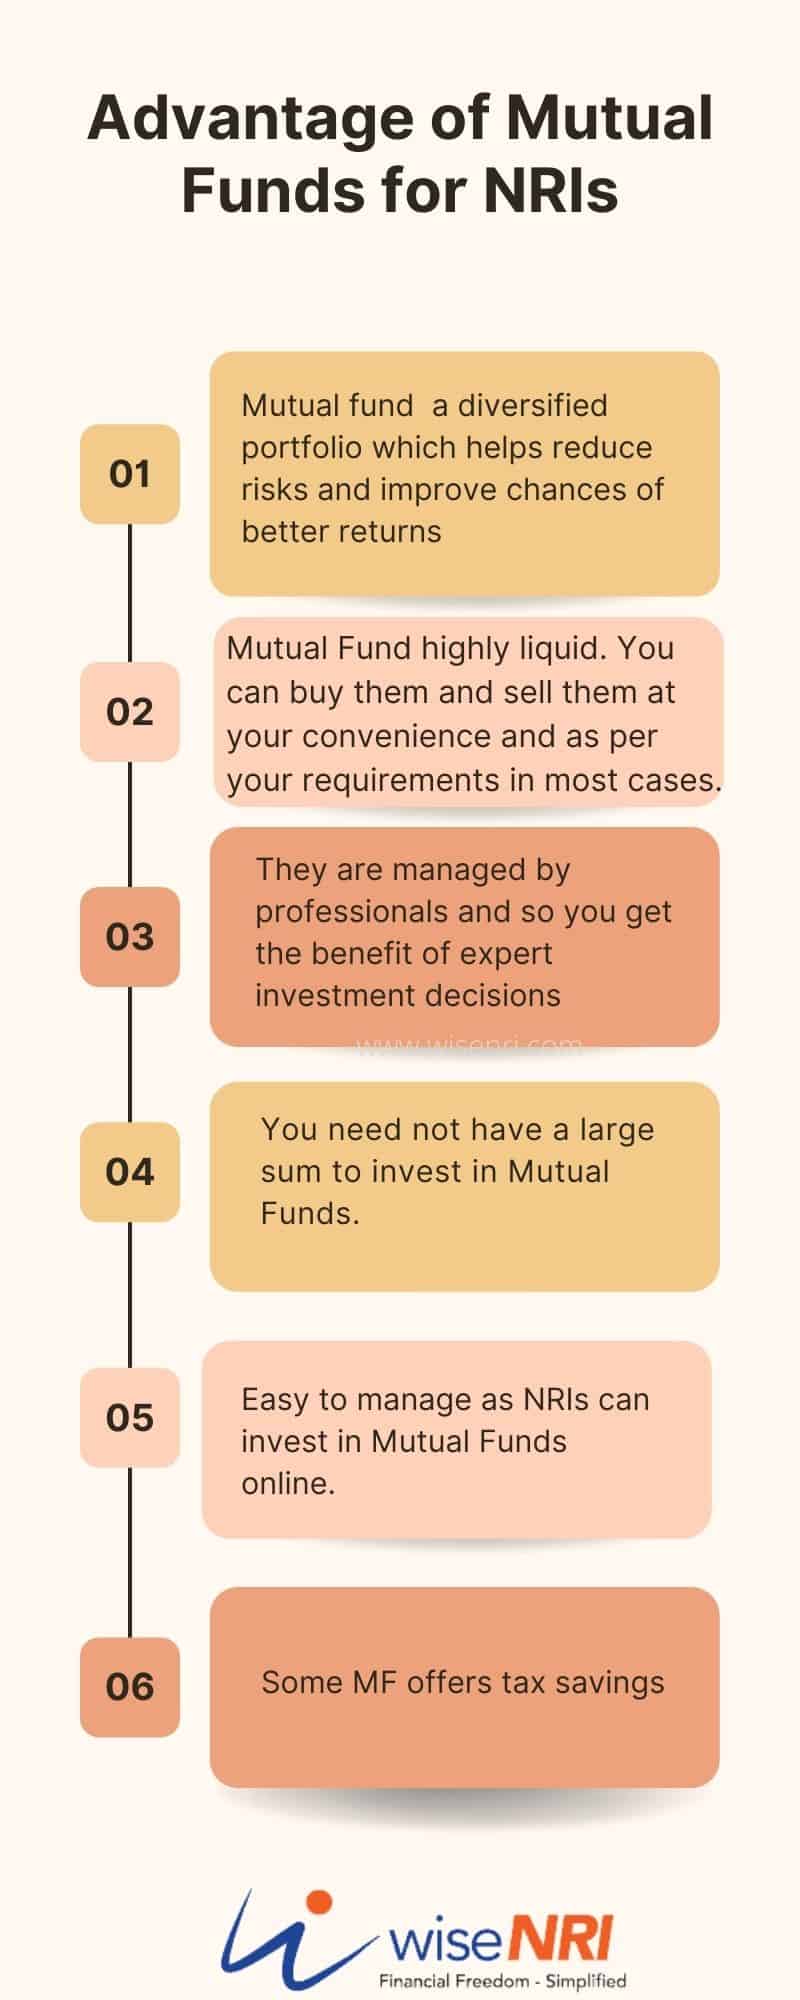 Comprehensive Guide for Investing in Mutual Funds for NRI